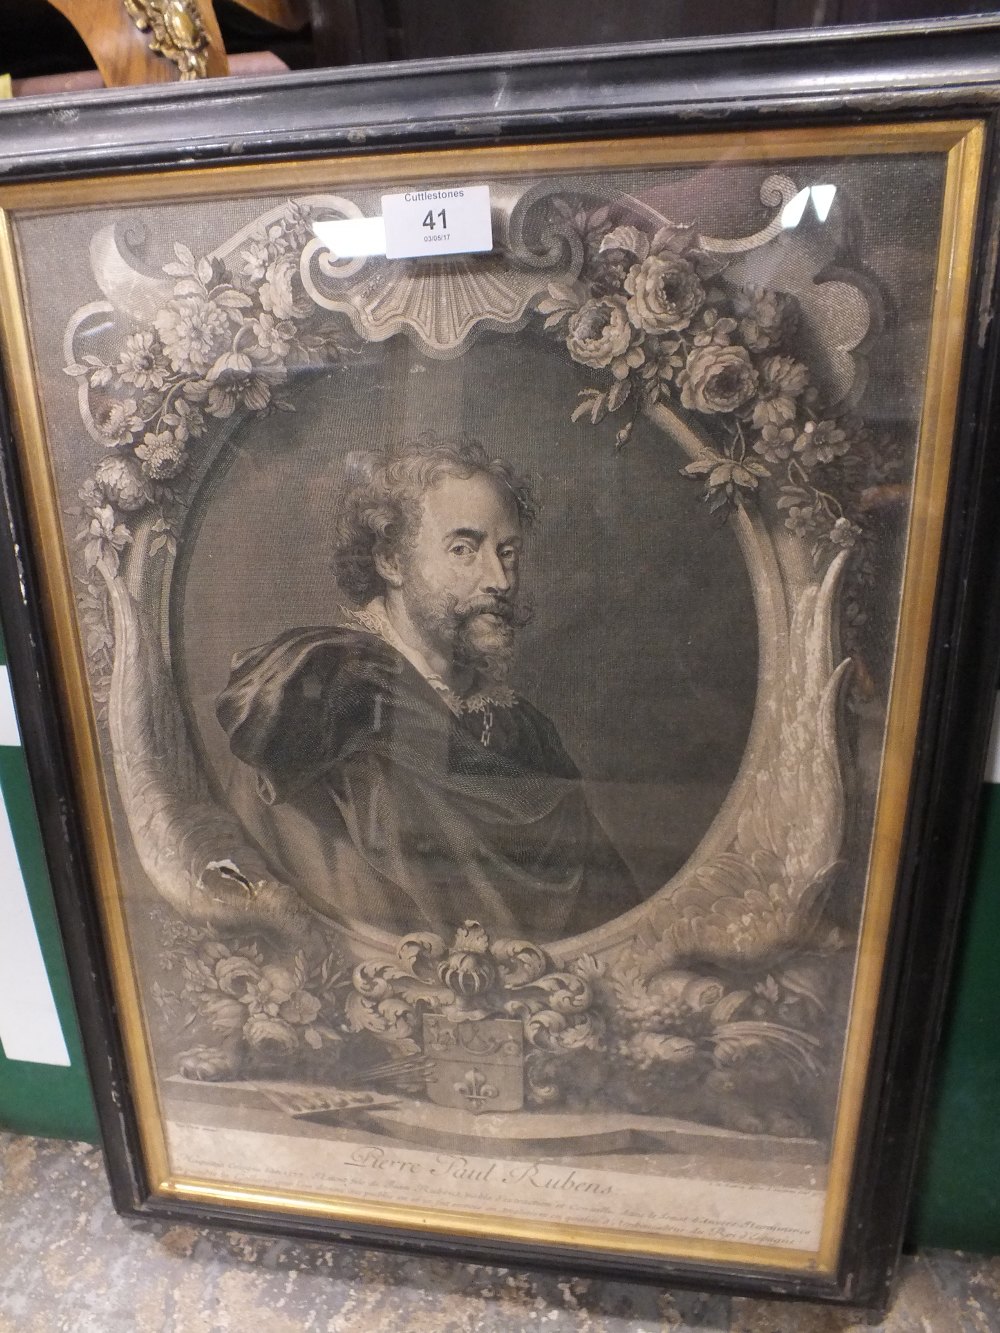 A FRAMED AND GLAZED PORTRAIT ENGRAVING TITILED 'PIERRE PAUL RUBENS' 49 x 34 cm